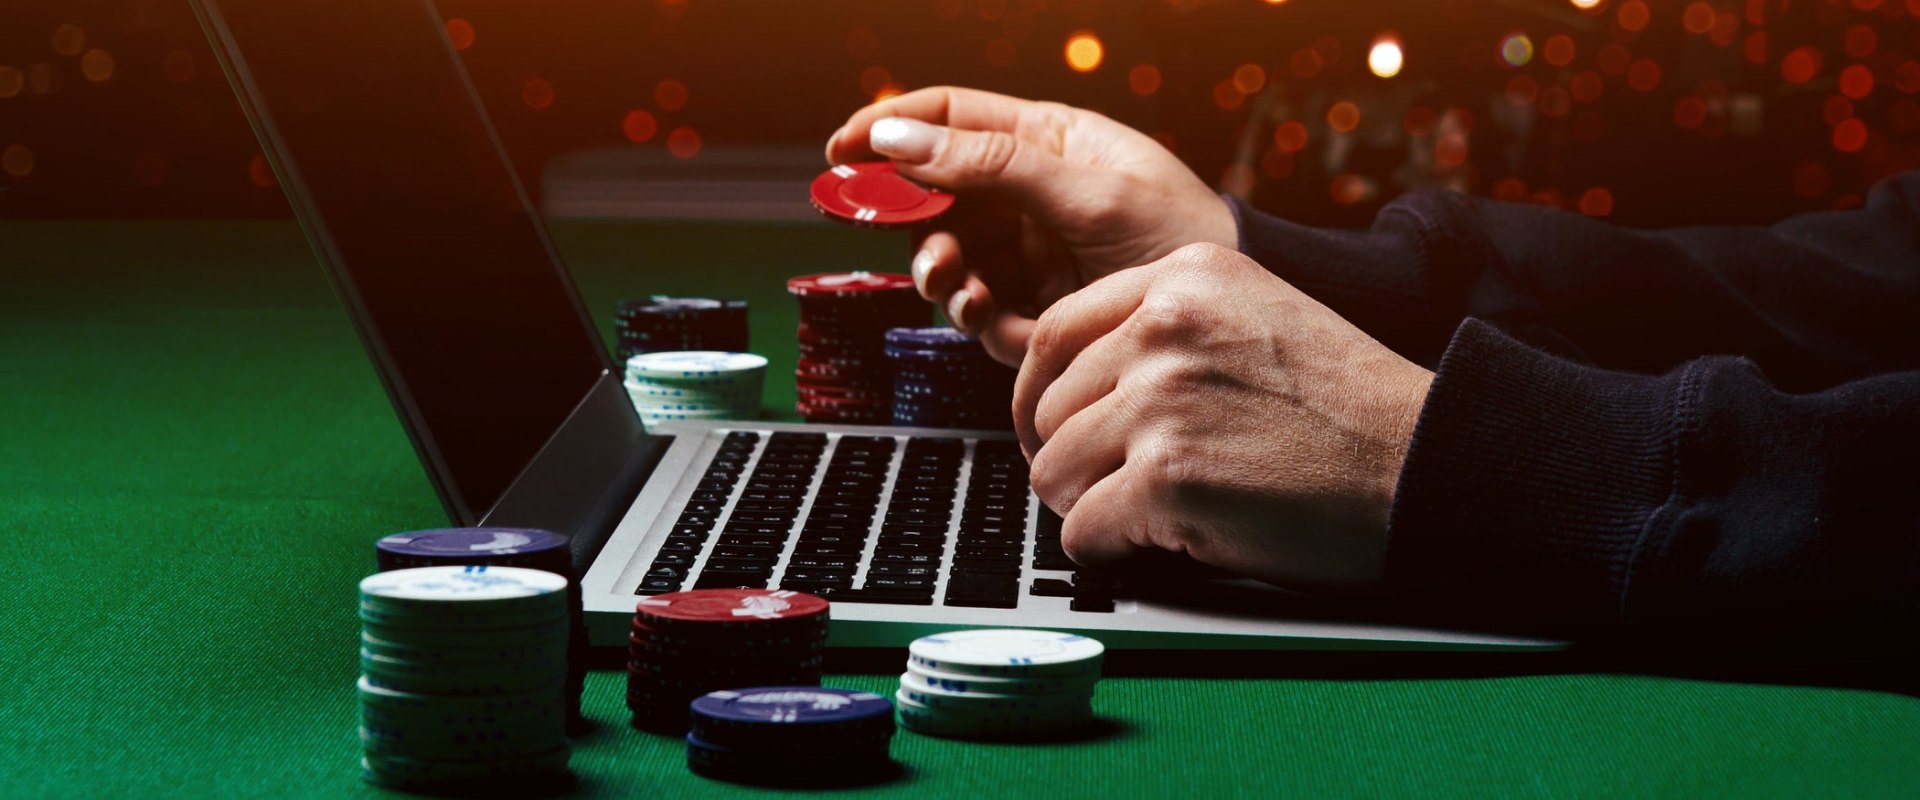 Can you fool online casinos?